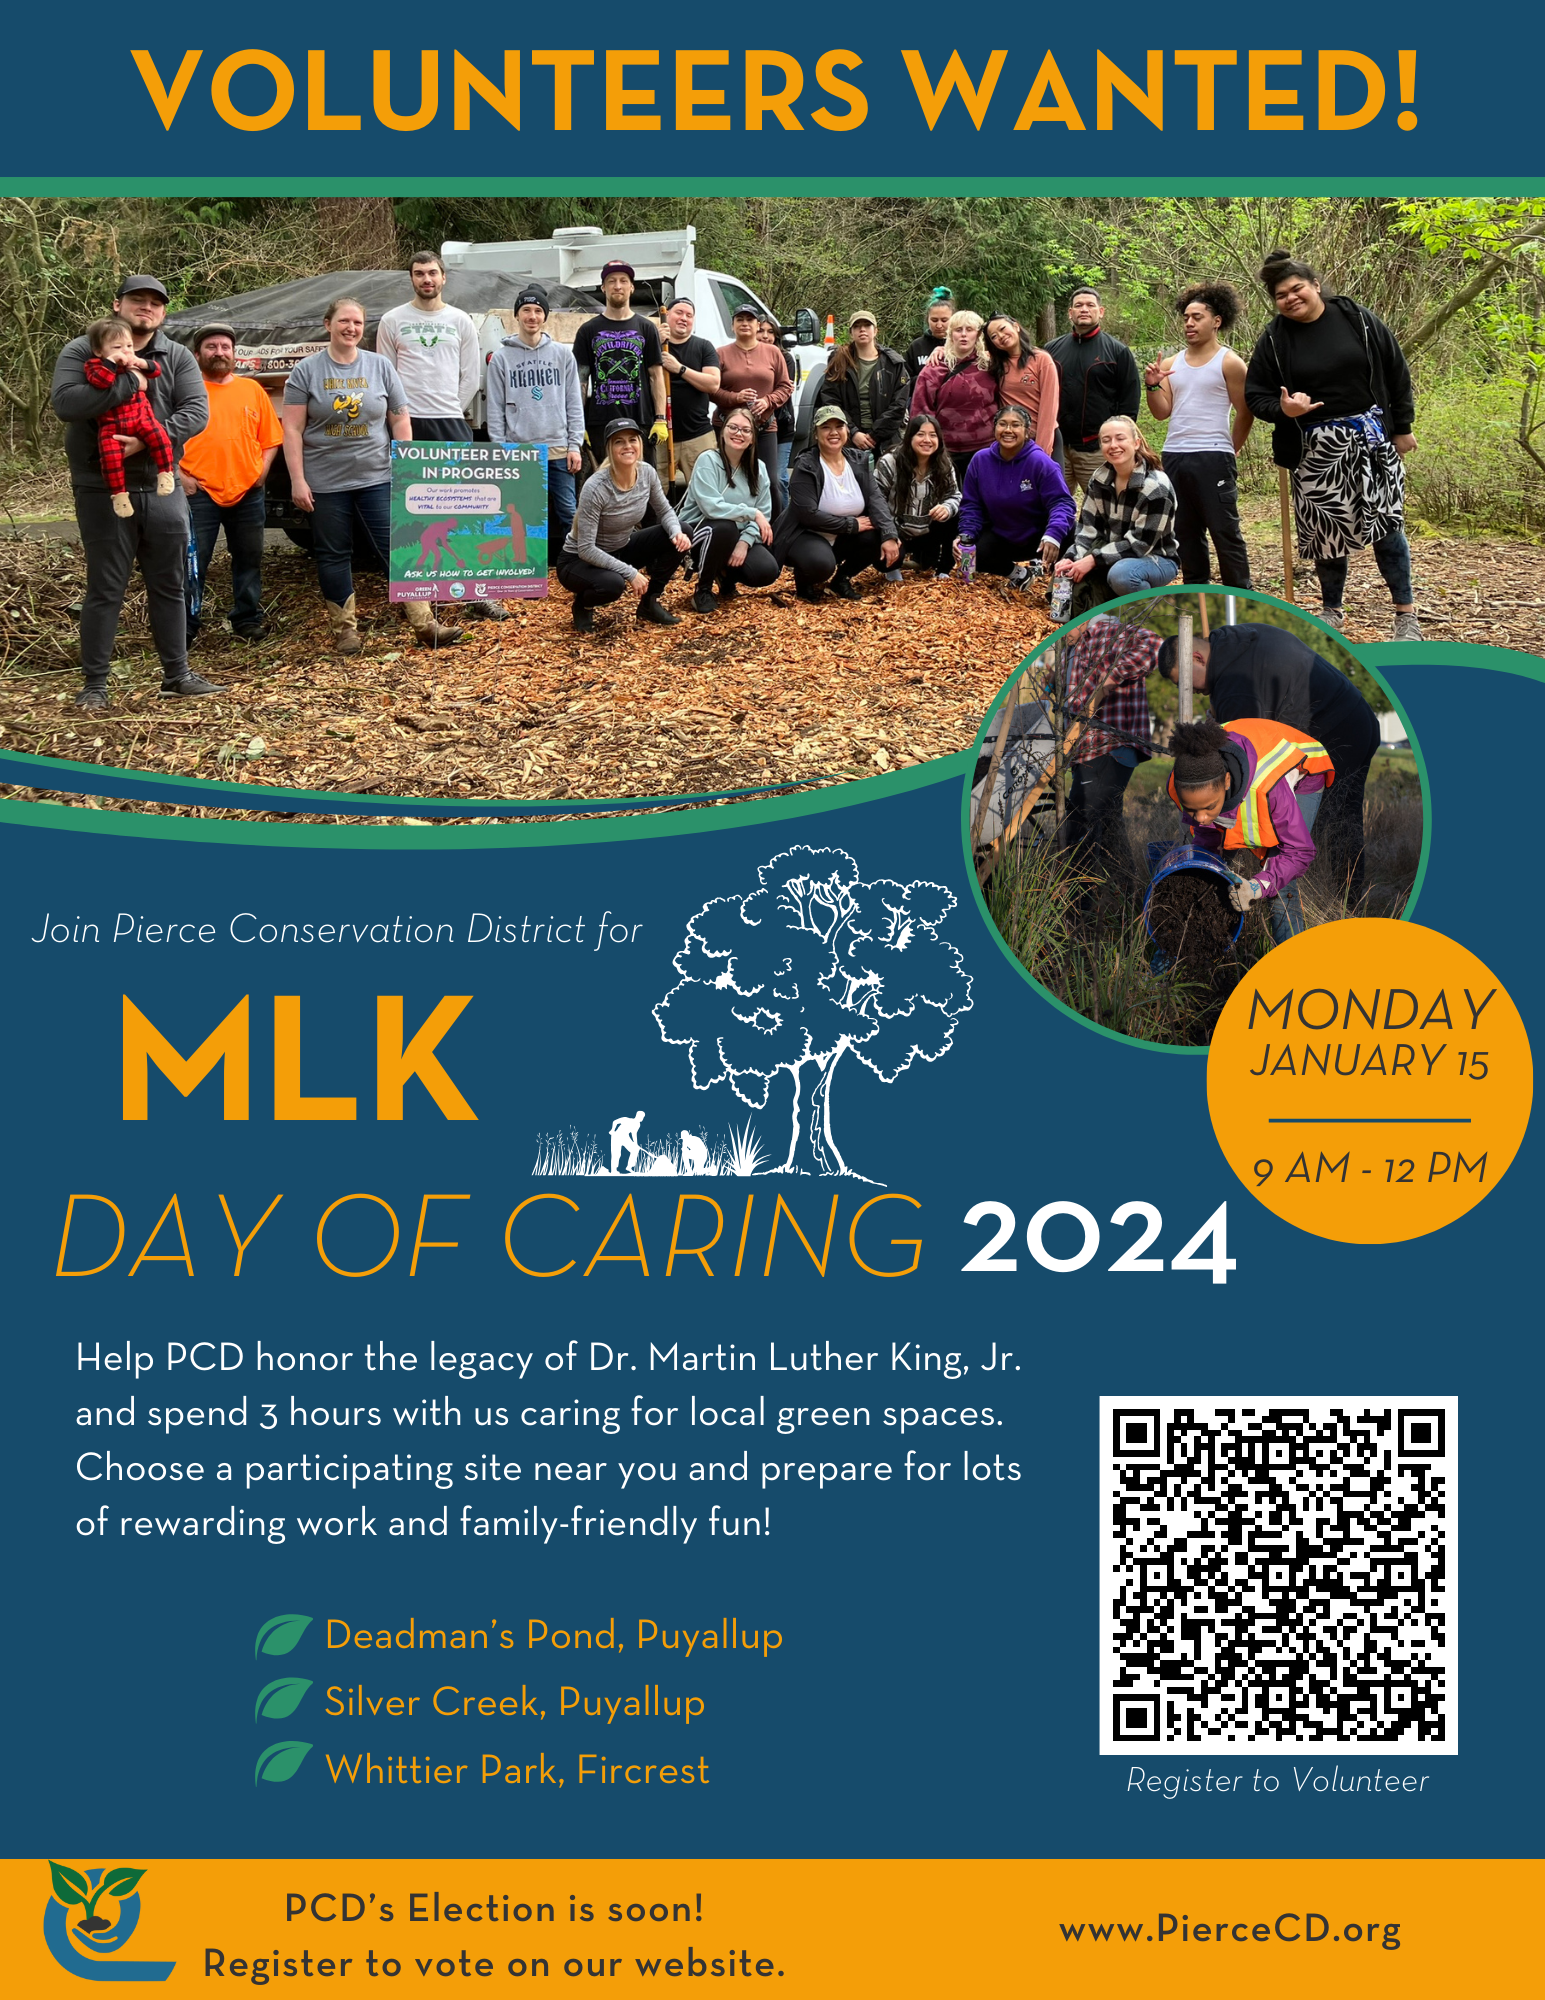 Volunteers wanted! MLK Day of Caring poster with volunteers pictured.